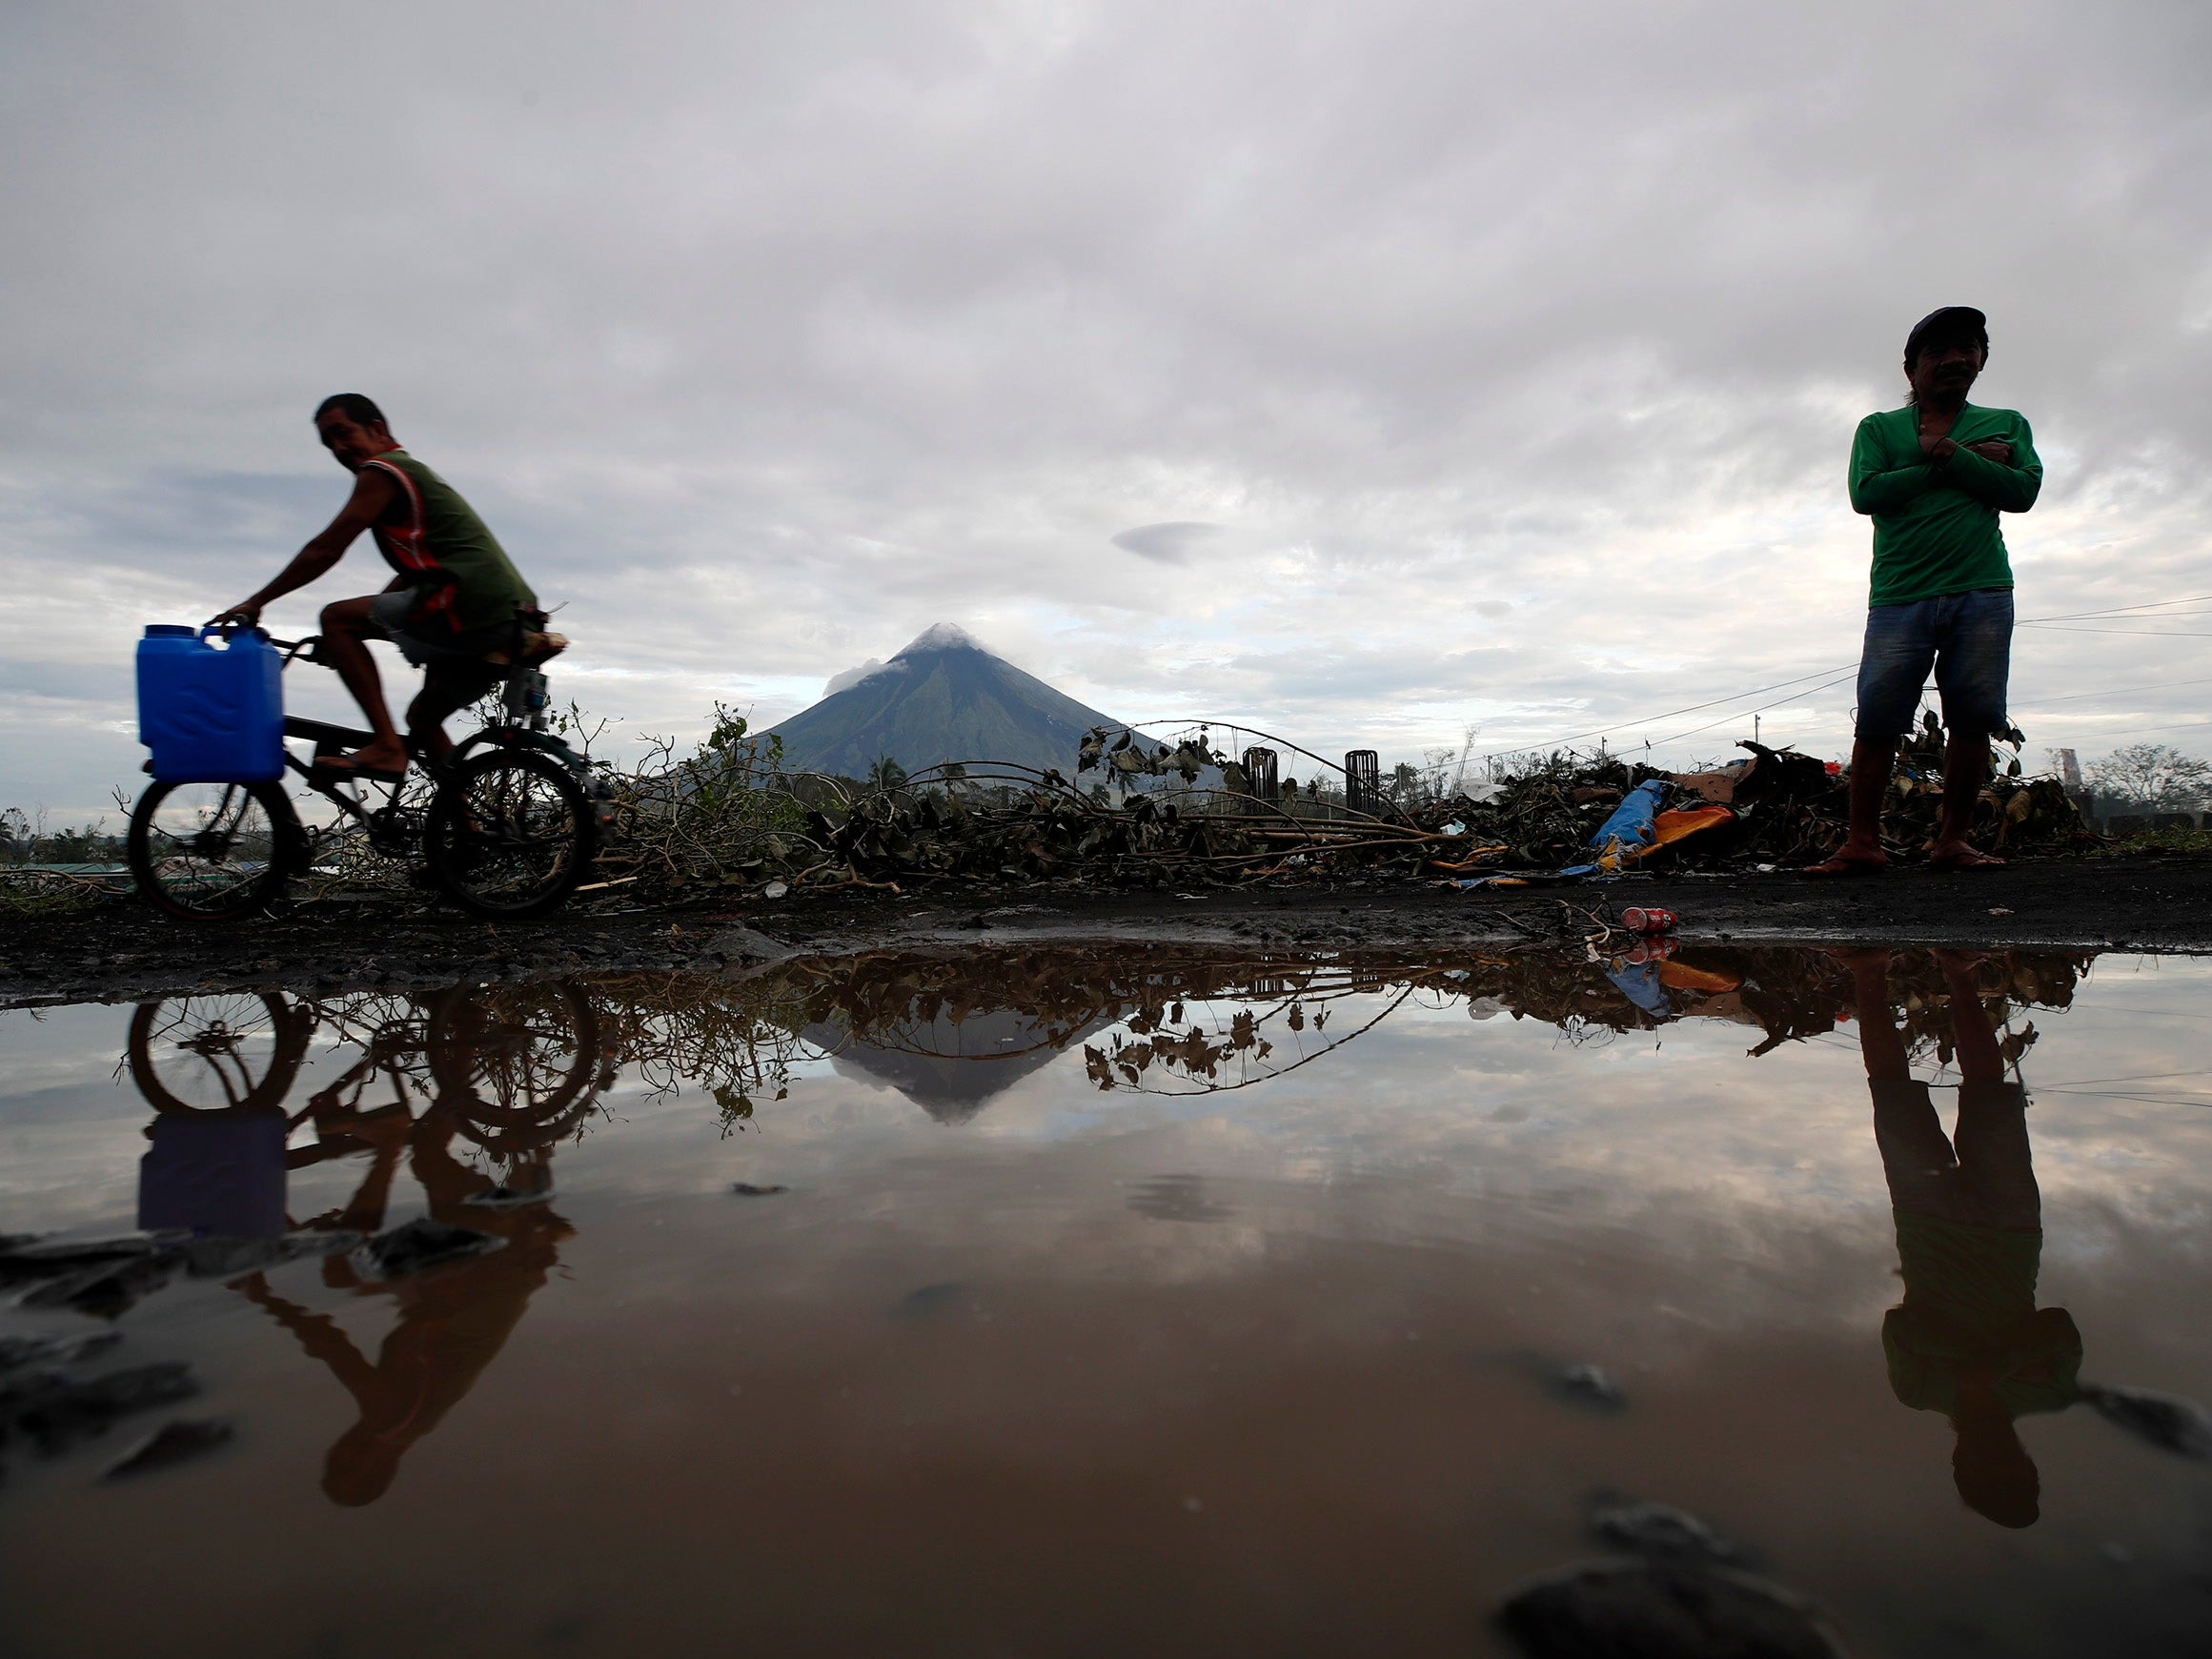 Villagers wade on flood water brought by a lahar flow due to typhoon Goni at the foot of Mayon volcano in The Philippines